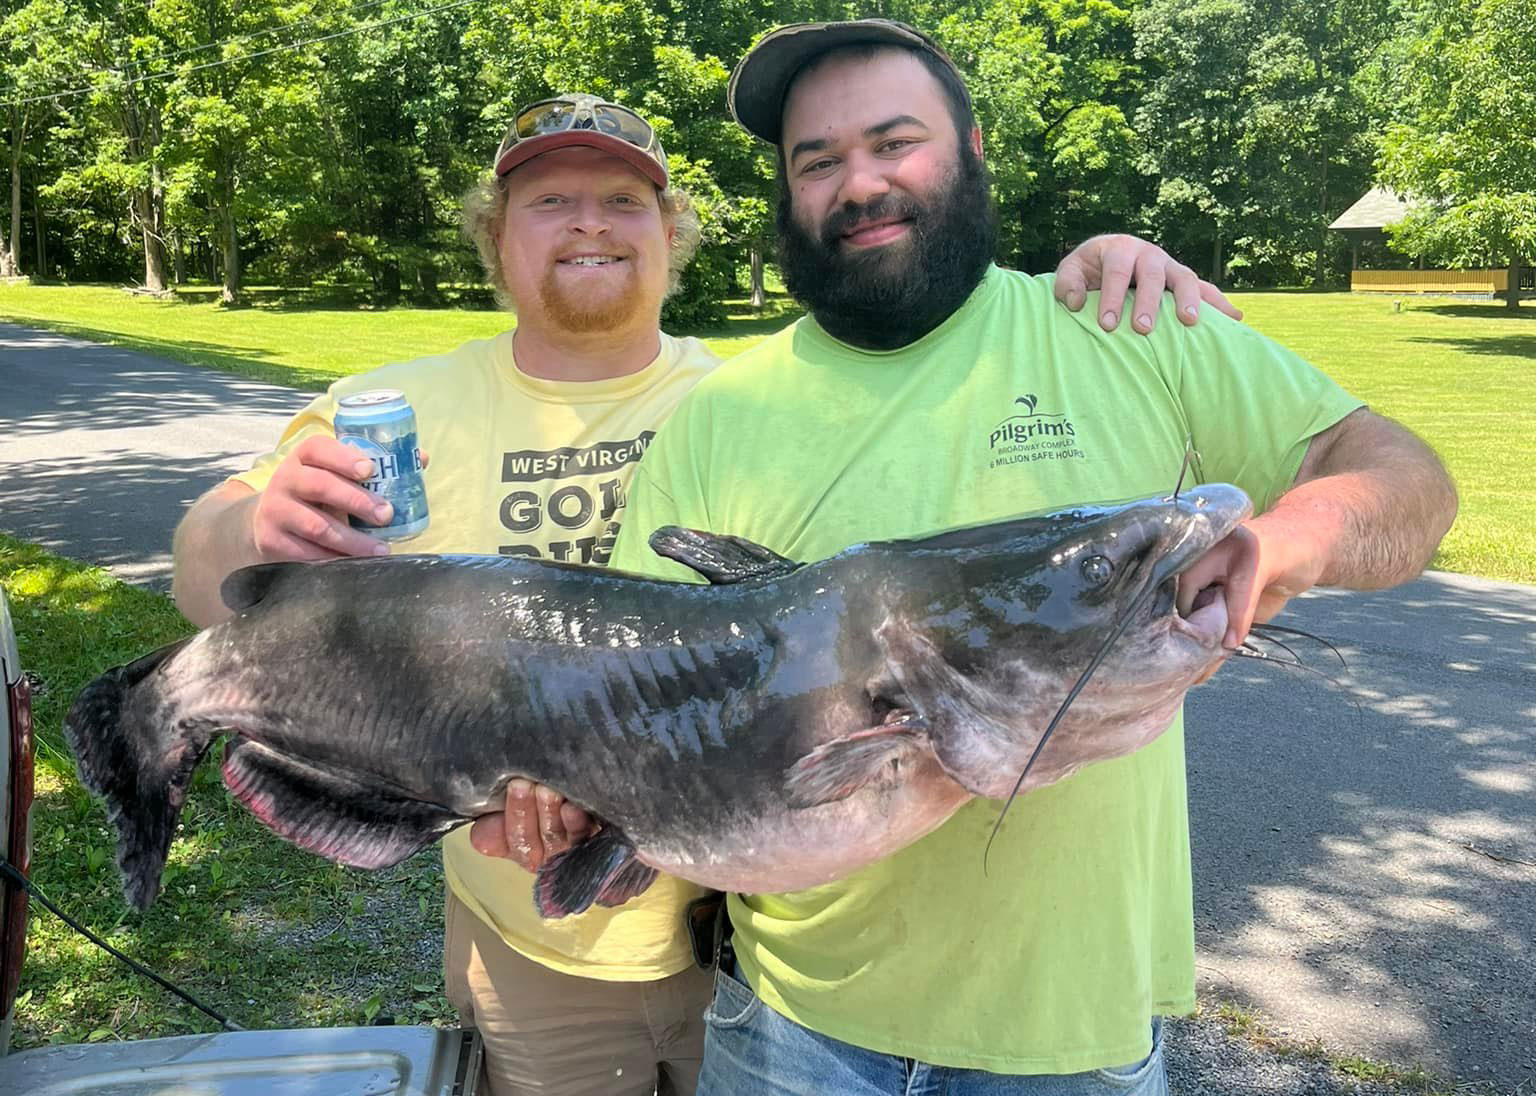 Burkett (left) and his buddy holding the state record channel cat.